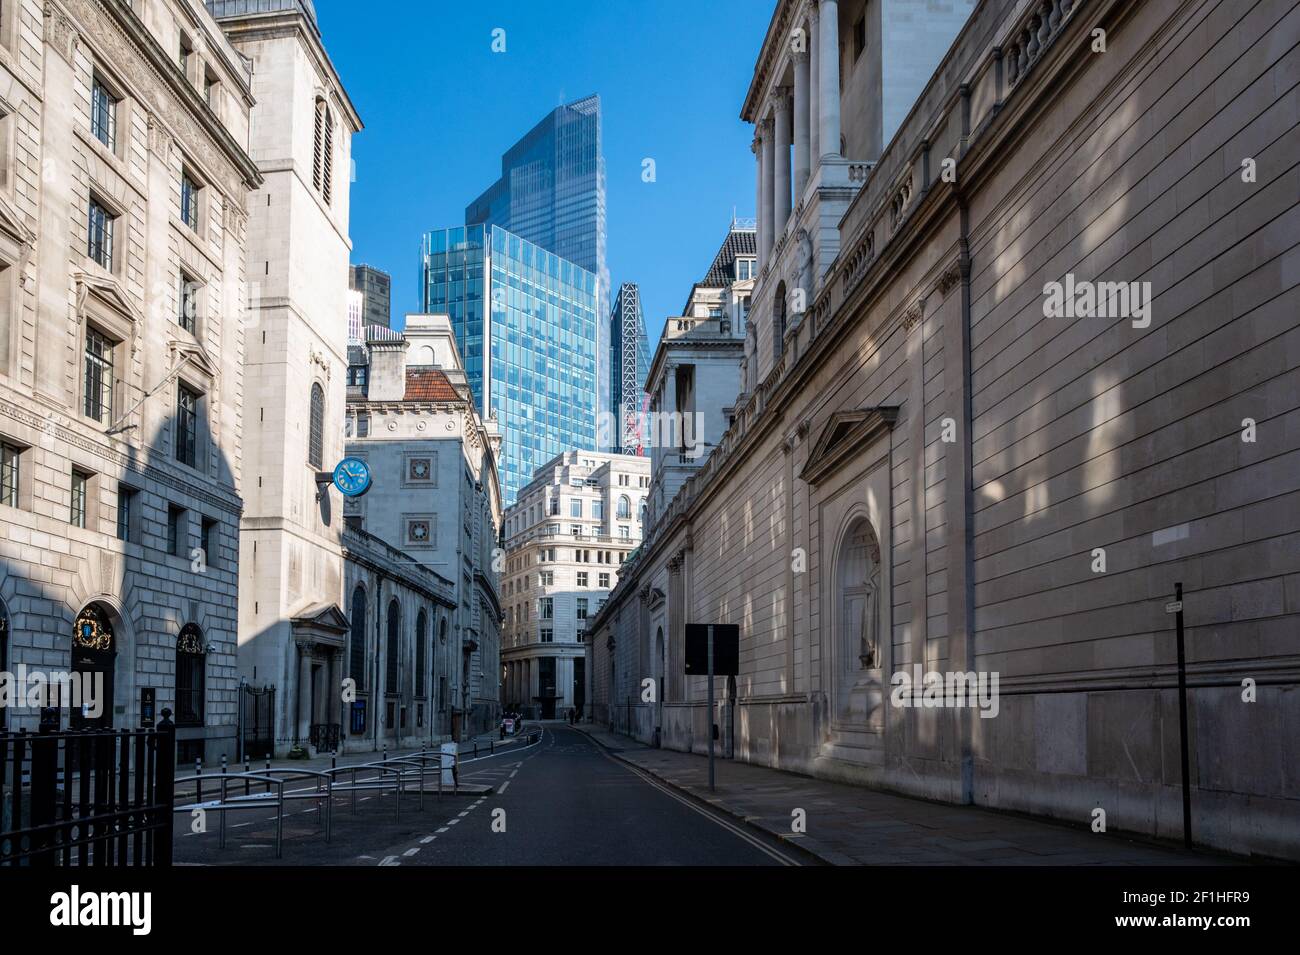 Covid pandemic lockdown; a deserted street in the City of London financial district . (Lothbury, Bank of England, London). Stock Photo